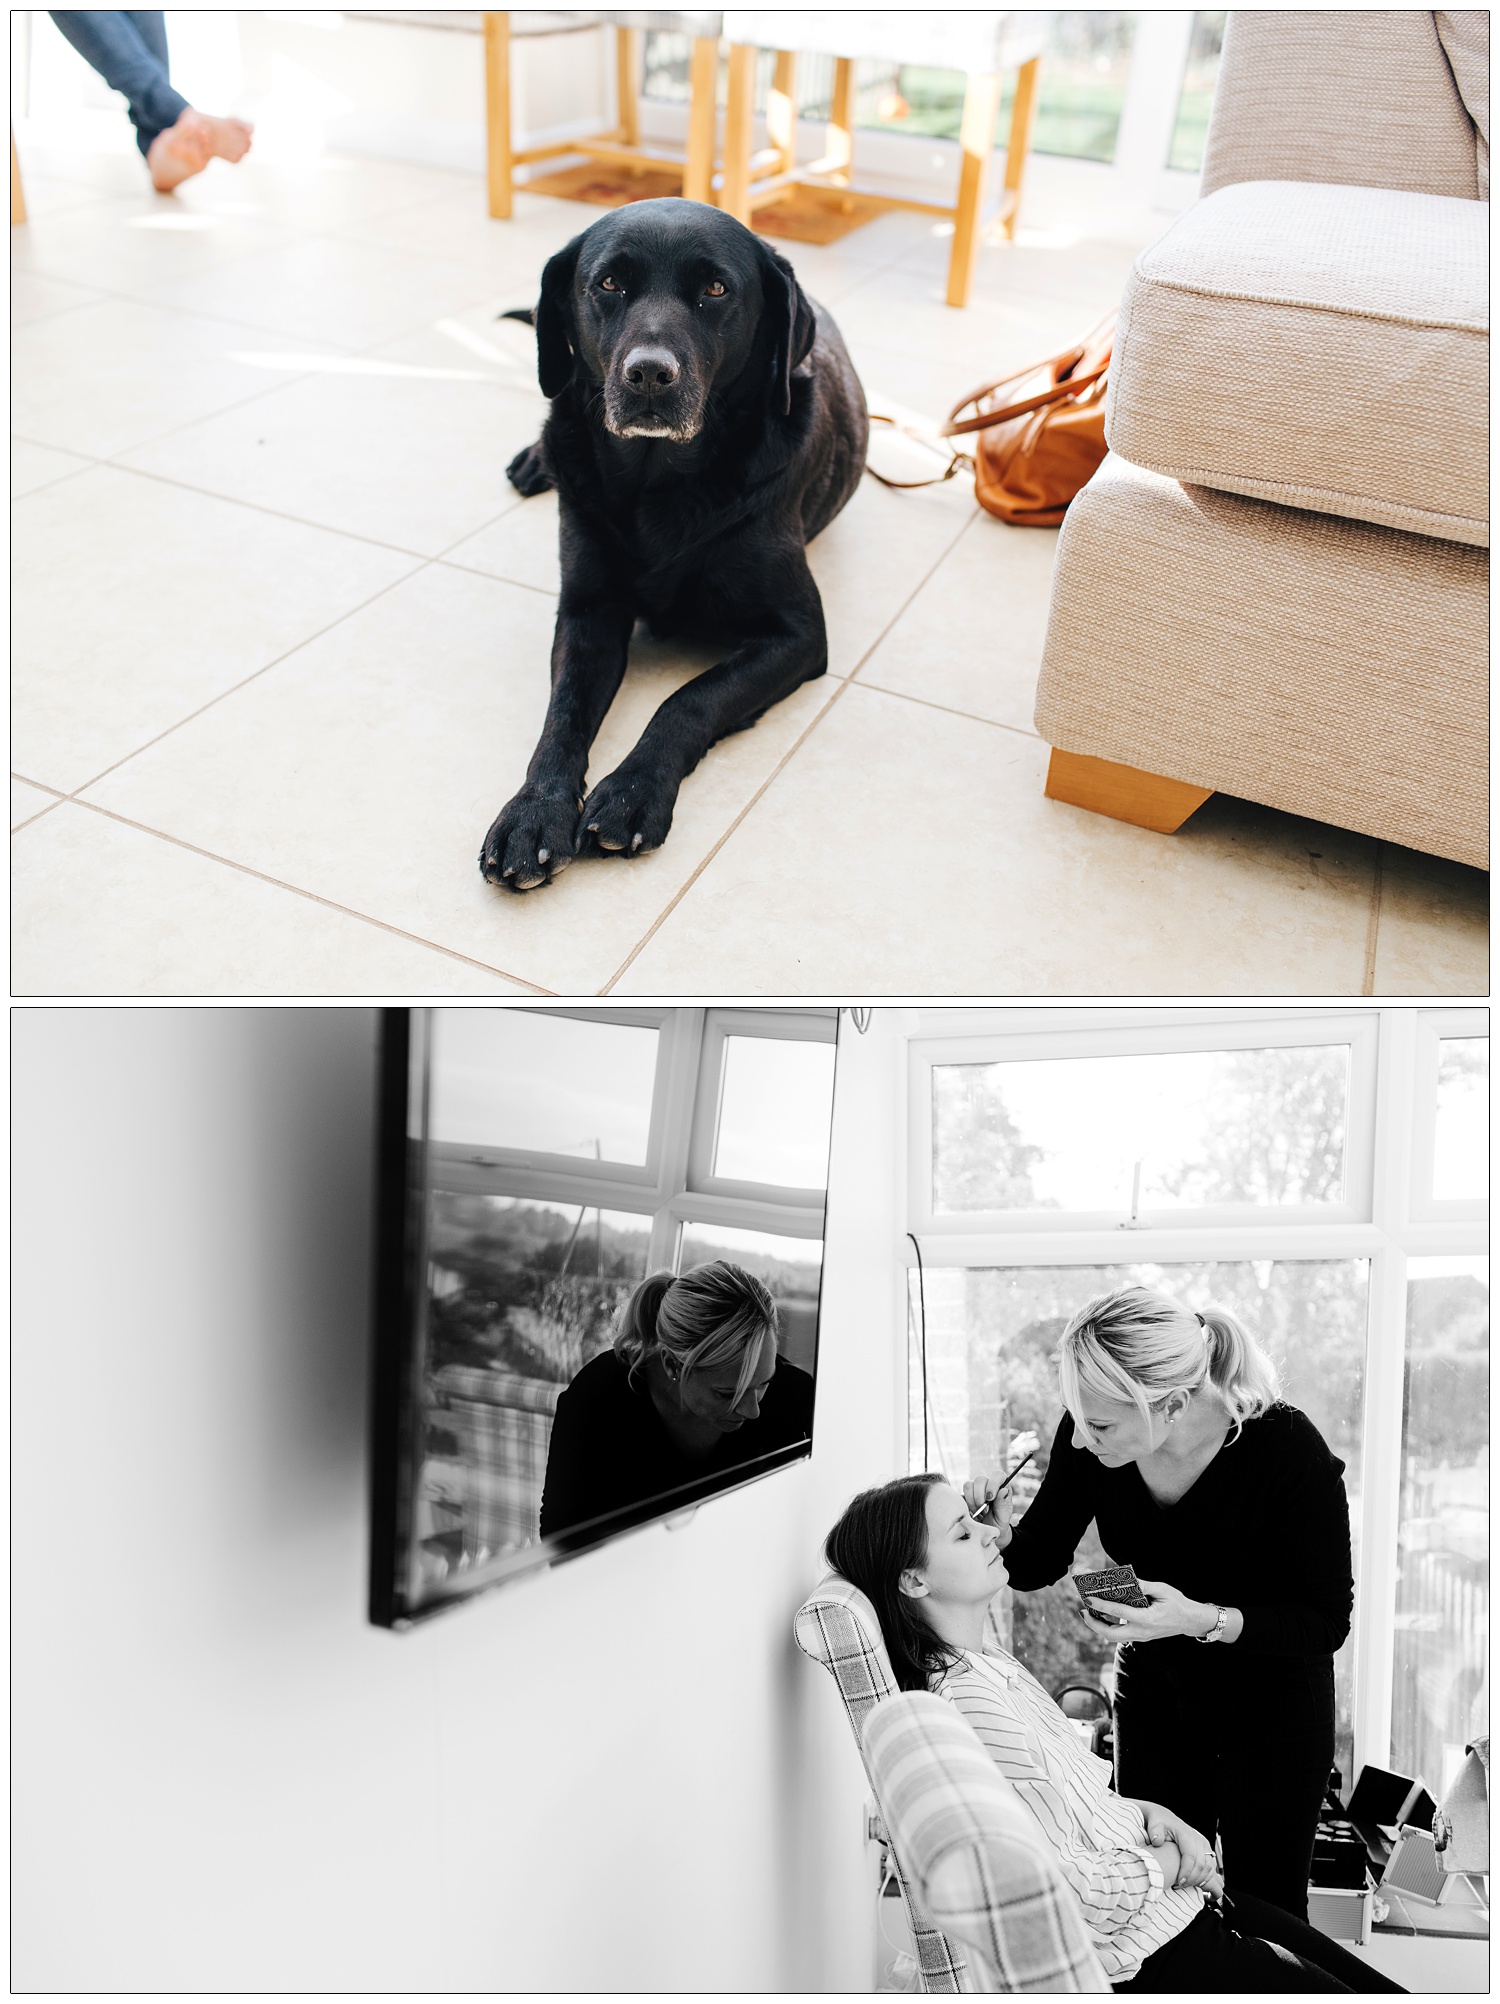 A black dog looks at the camera as he lies on the floor next to a sofa